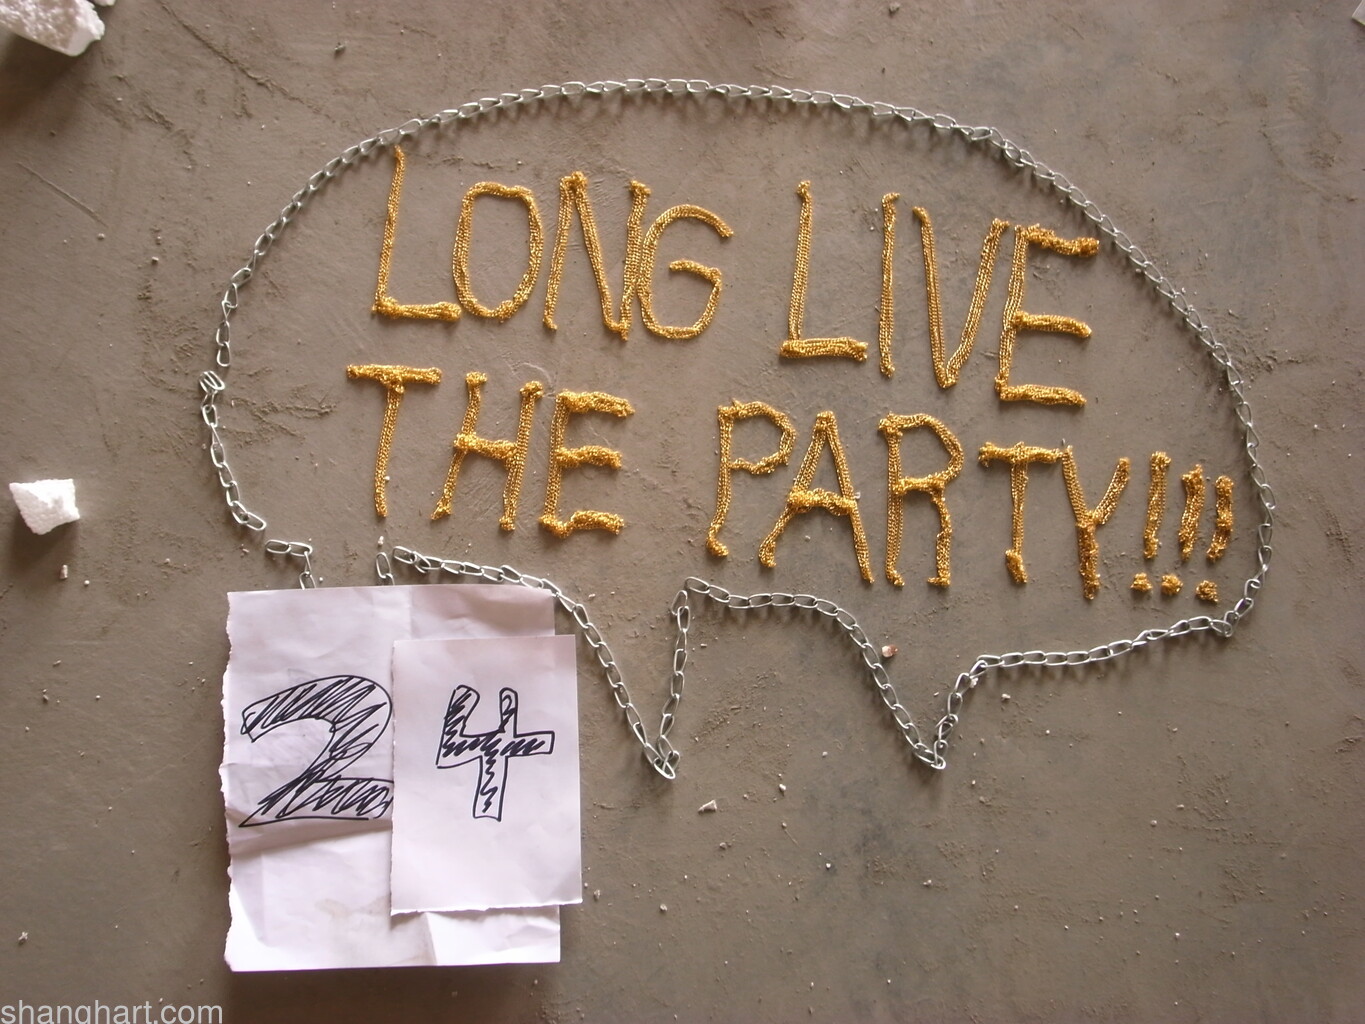 No.24 (570x315mm)  Long live the party!!!